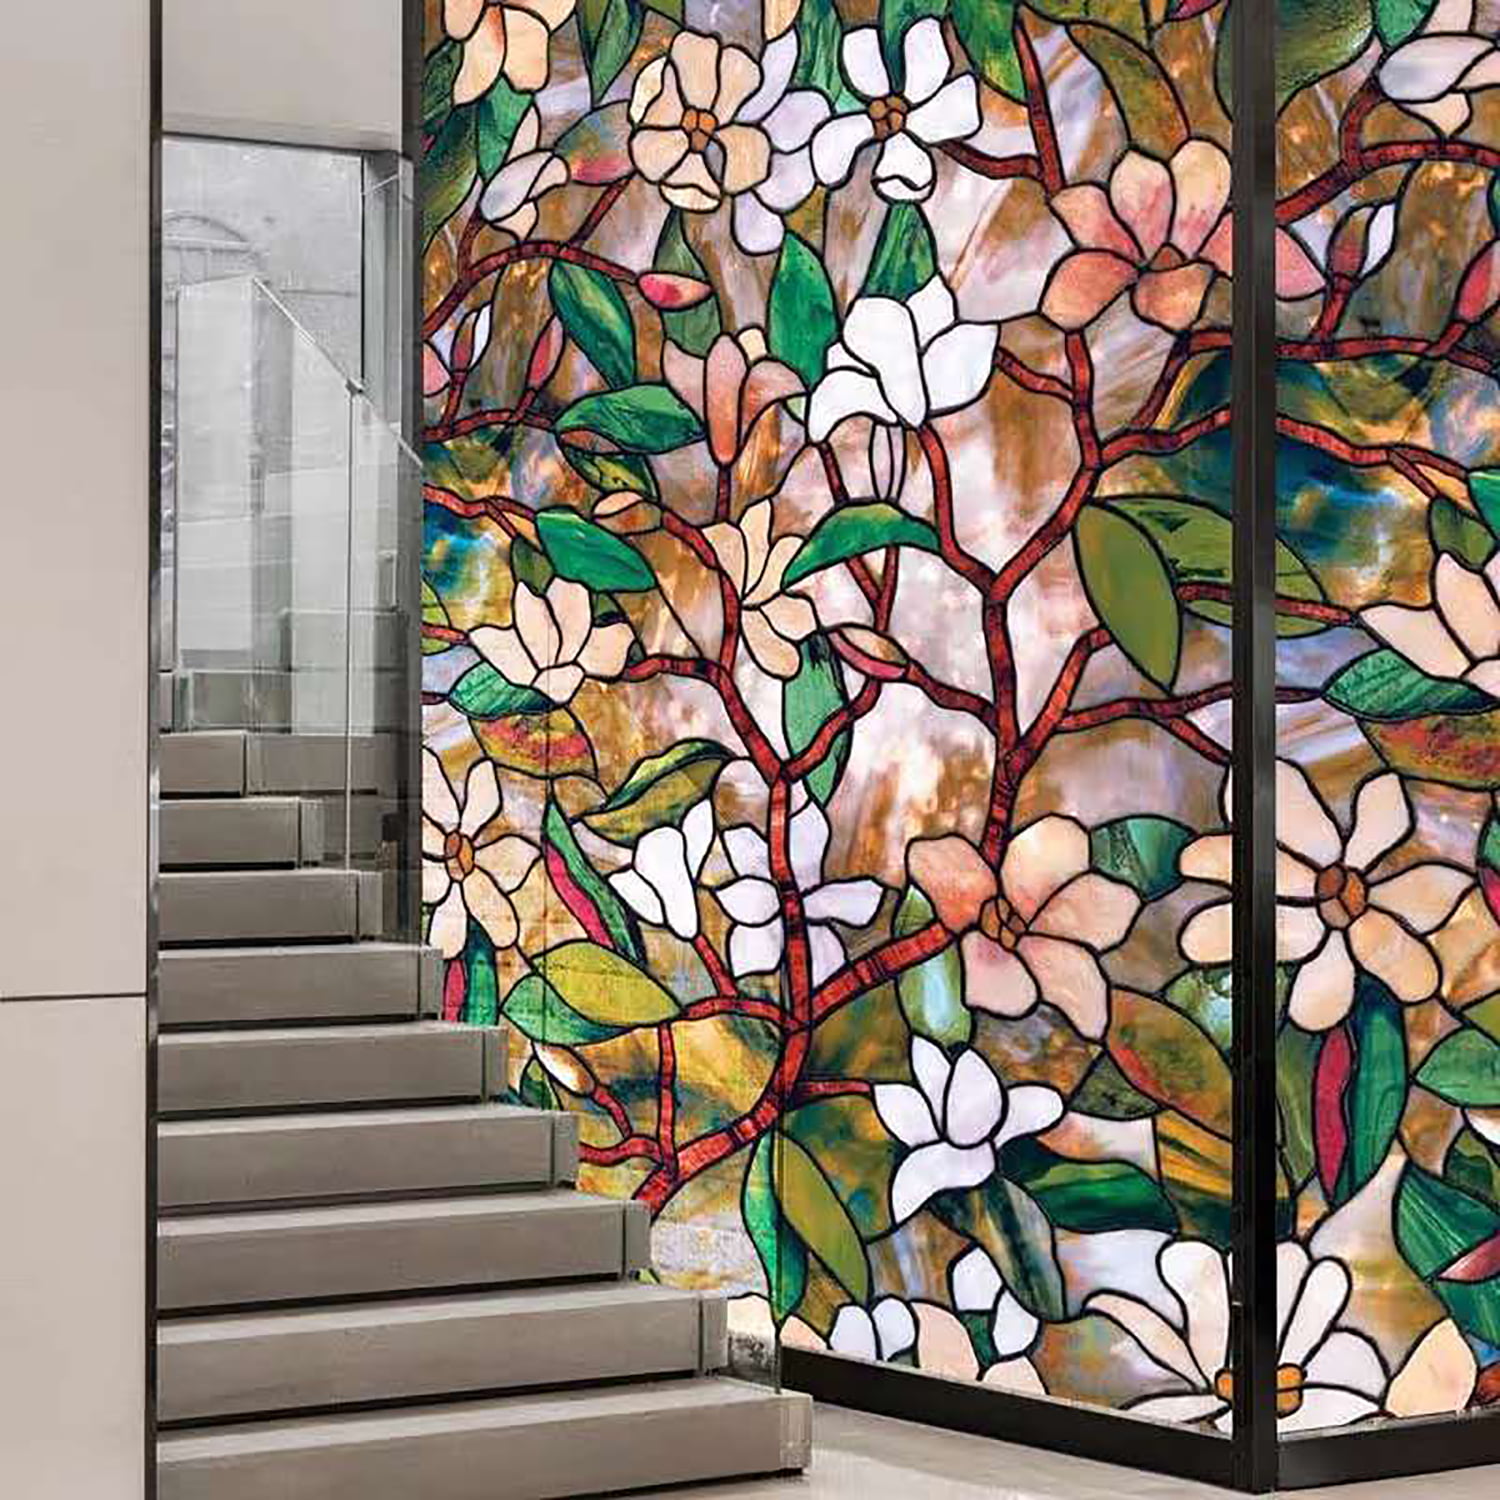 78.7" Frosted Stained 3D Glass Sticker Window Film Vinyl Decorative Static Cling 